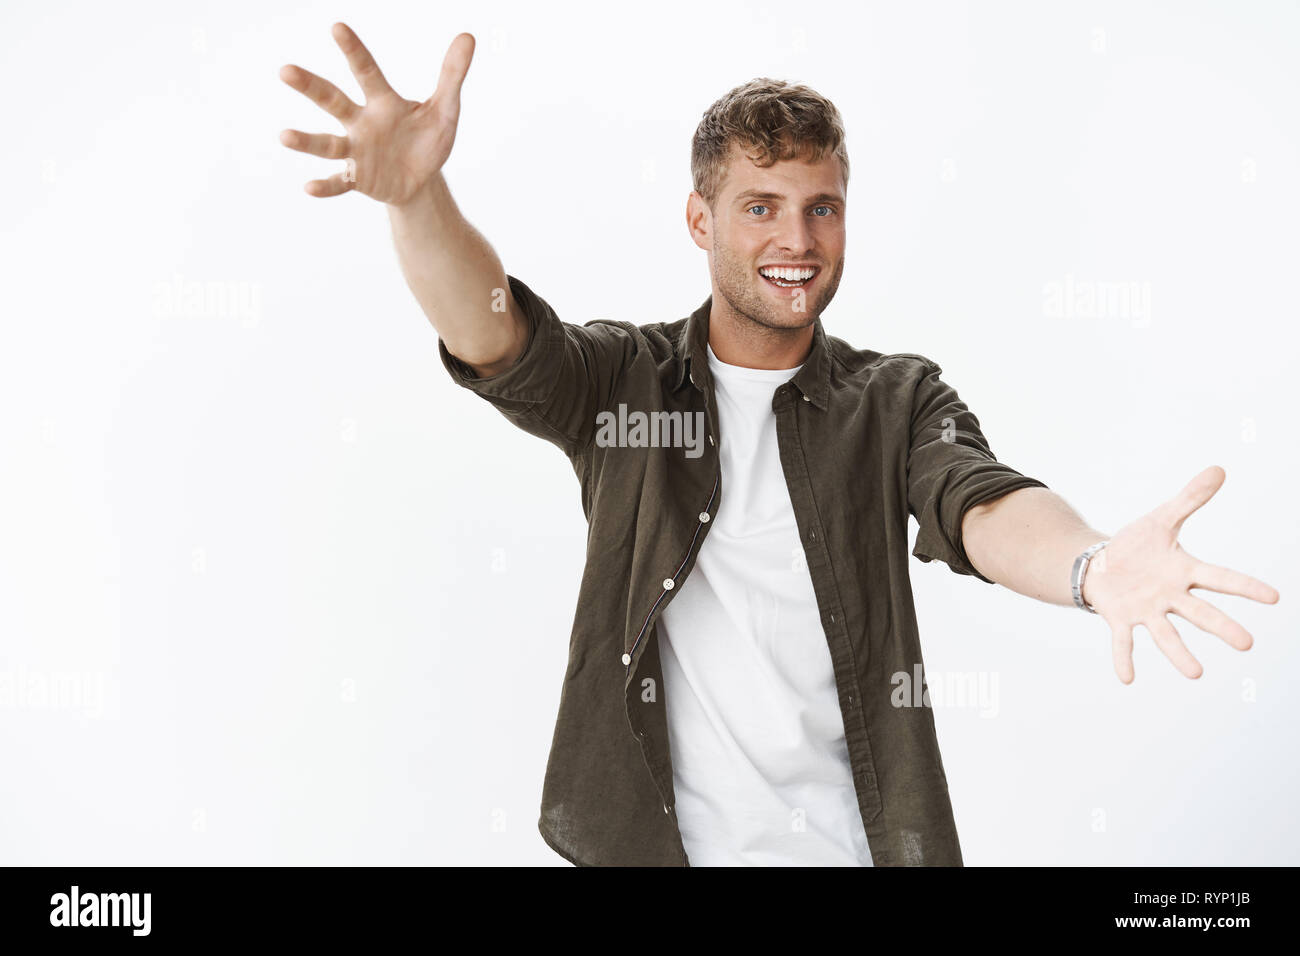 Jazz hands make day brighter. Joyful and carefree charming male with bristle, blue eyes, fair hair extending arms towards camera to give warm friendly Stock Photo